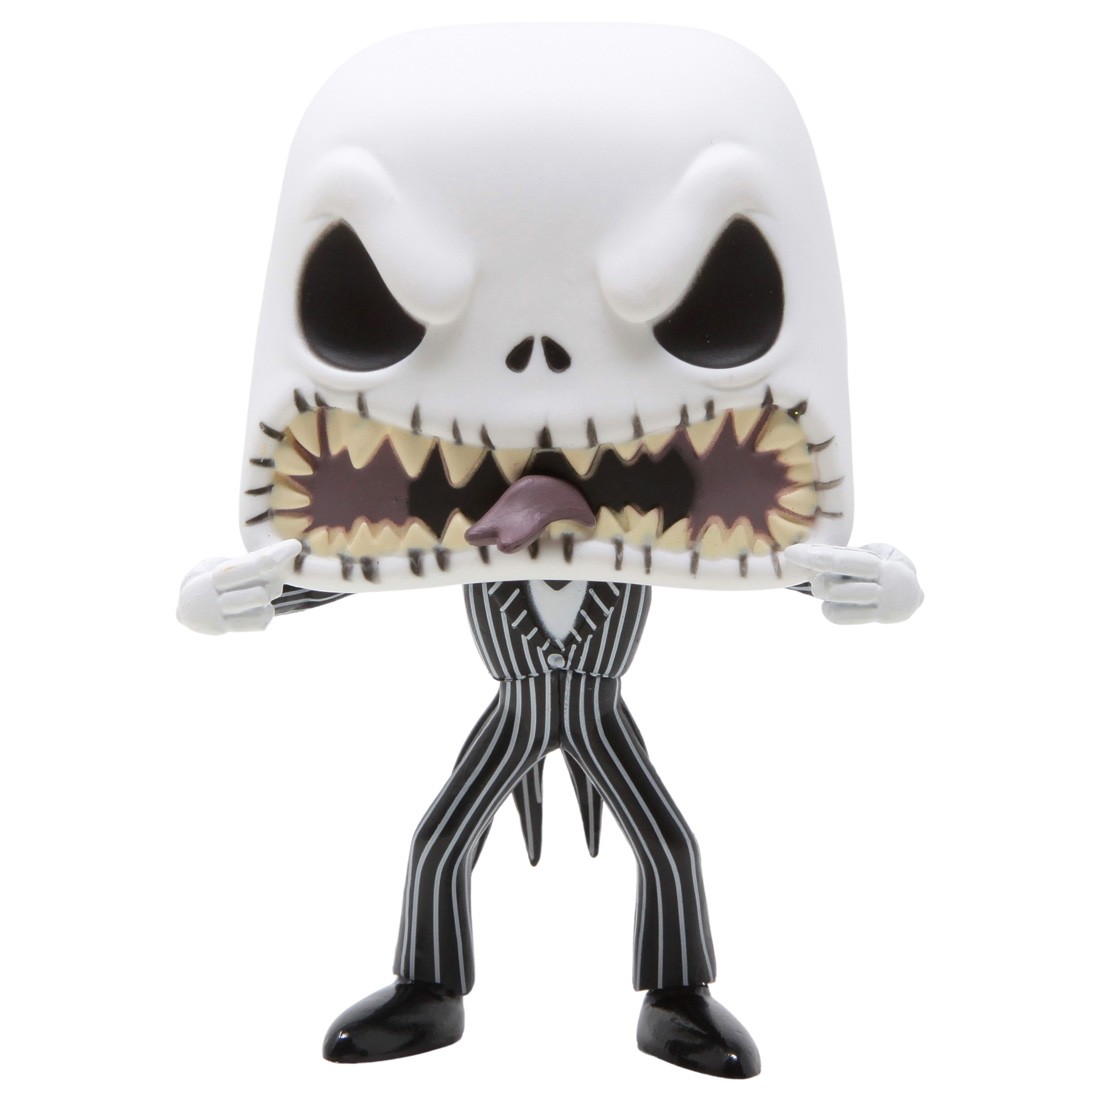 Funko POP Disney Nightmare Before Christmas Jack Scary Face (white)